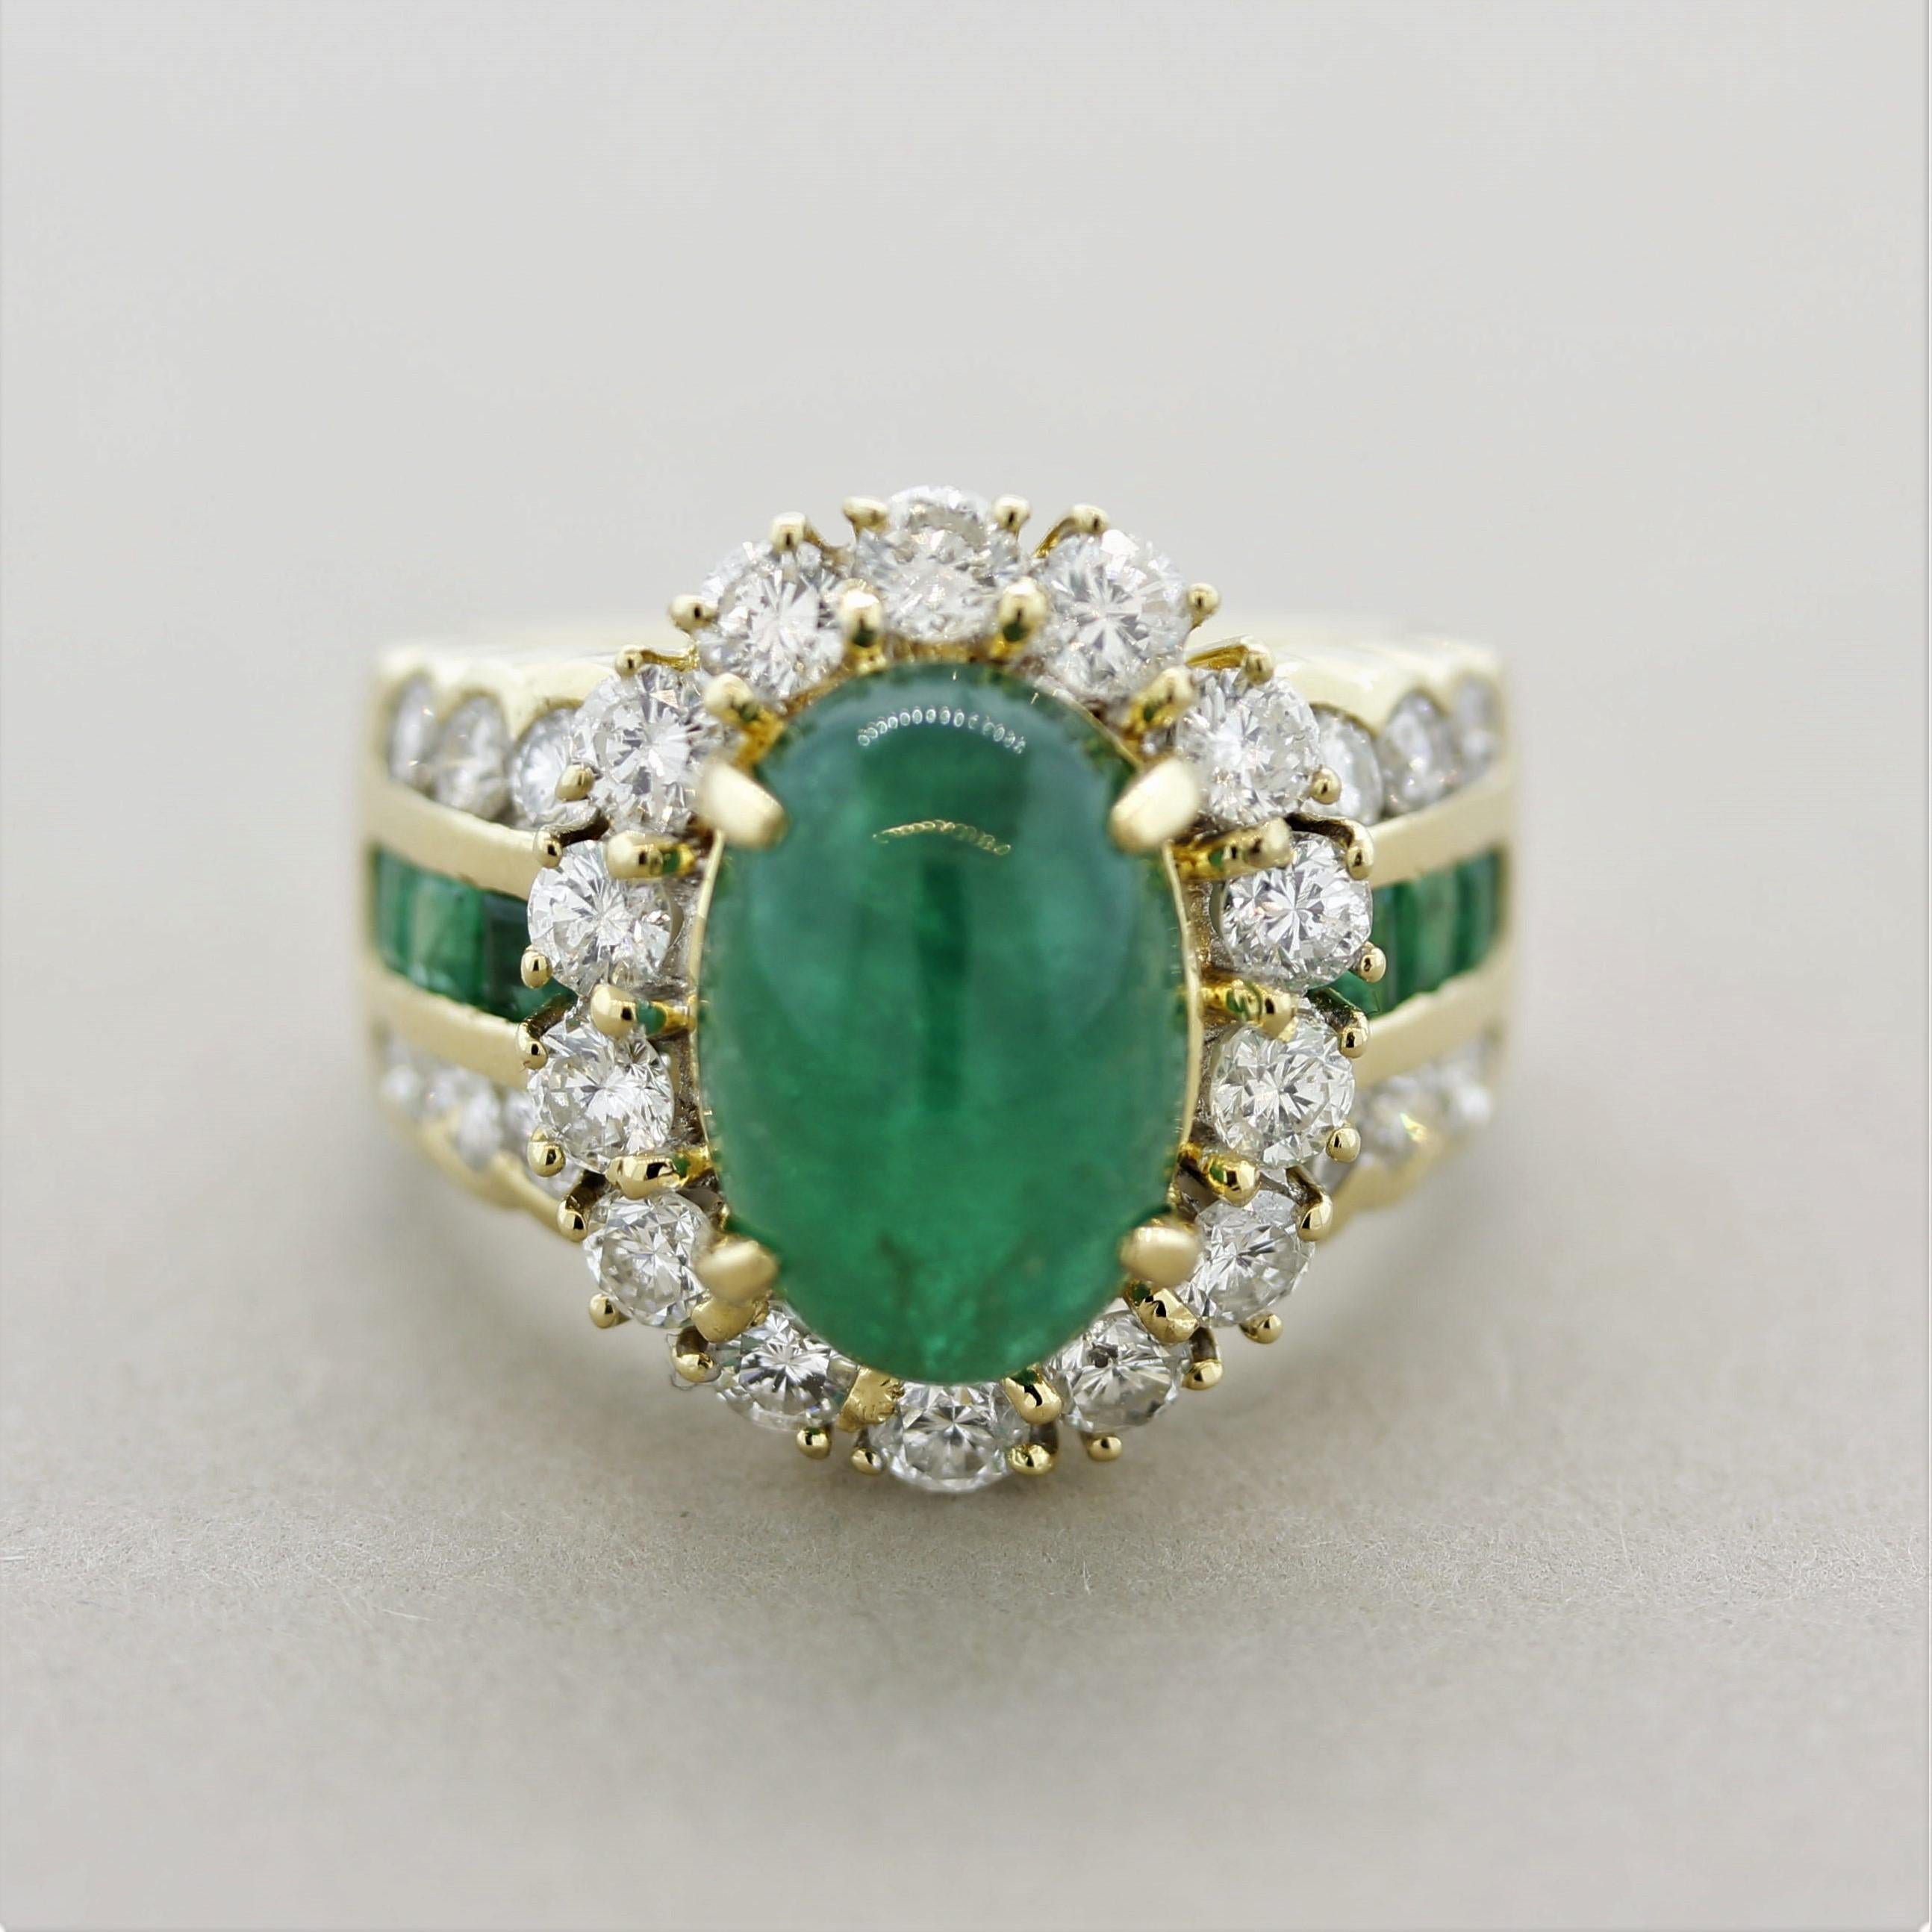 Bright green over 18k yellow gold! This beautifully made ring features a 4.77 carat cabochon emerald with lovely green color. It is accented by 1.80 carats of round brilliant-cut diamonds which halo the center emerald as well as run down the sides